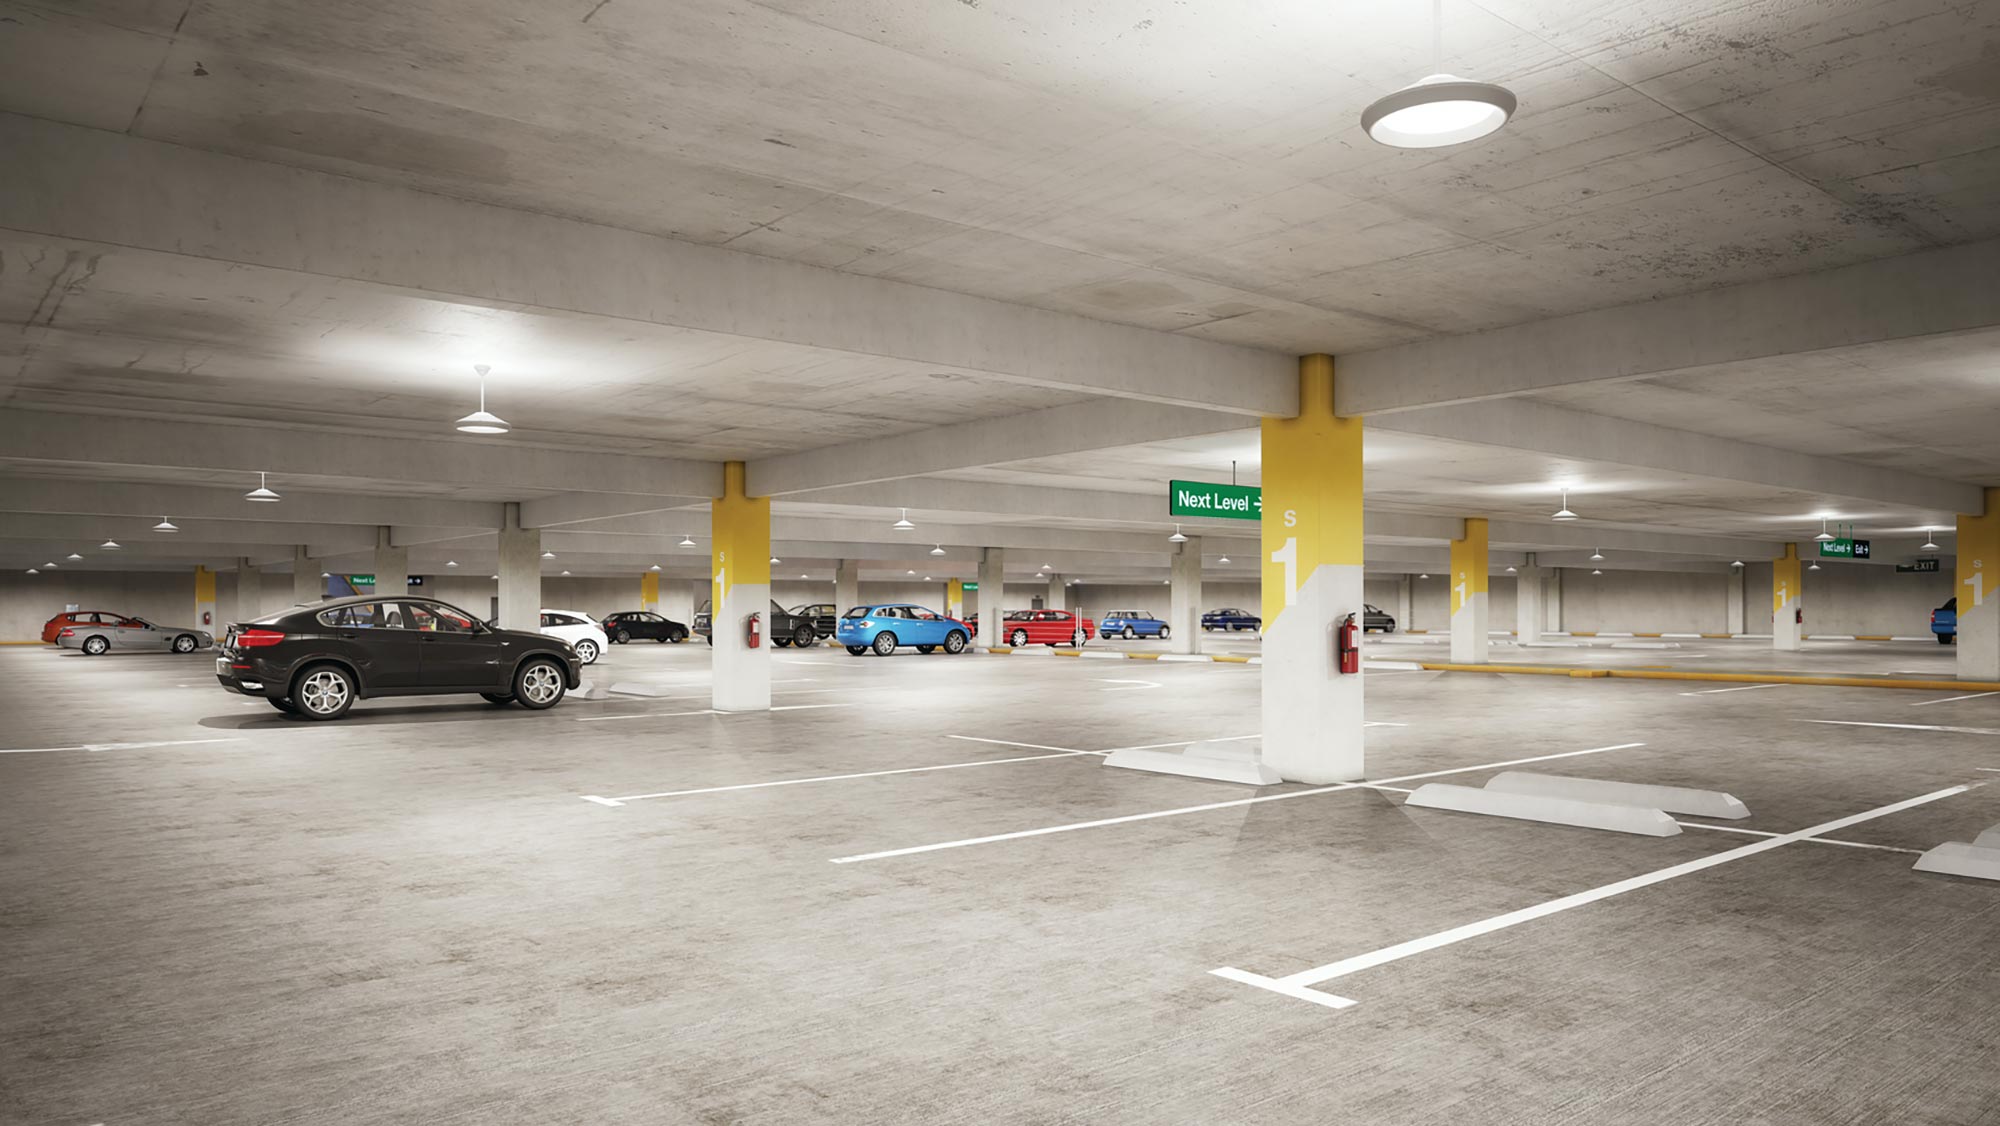 Having reliable parking solutions becomes essential as spring brings more activities and outdoor adventures. Garage and canopy products offer efficient lighting solutions for parking garages, carports, and other outdoor covered areas. Learn more about how these trusted industrial luminaires offer the best quality while ensuring user safety, security, and convenience!